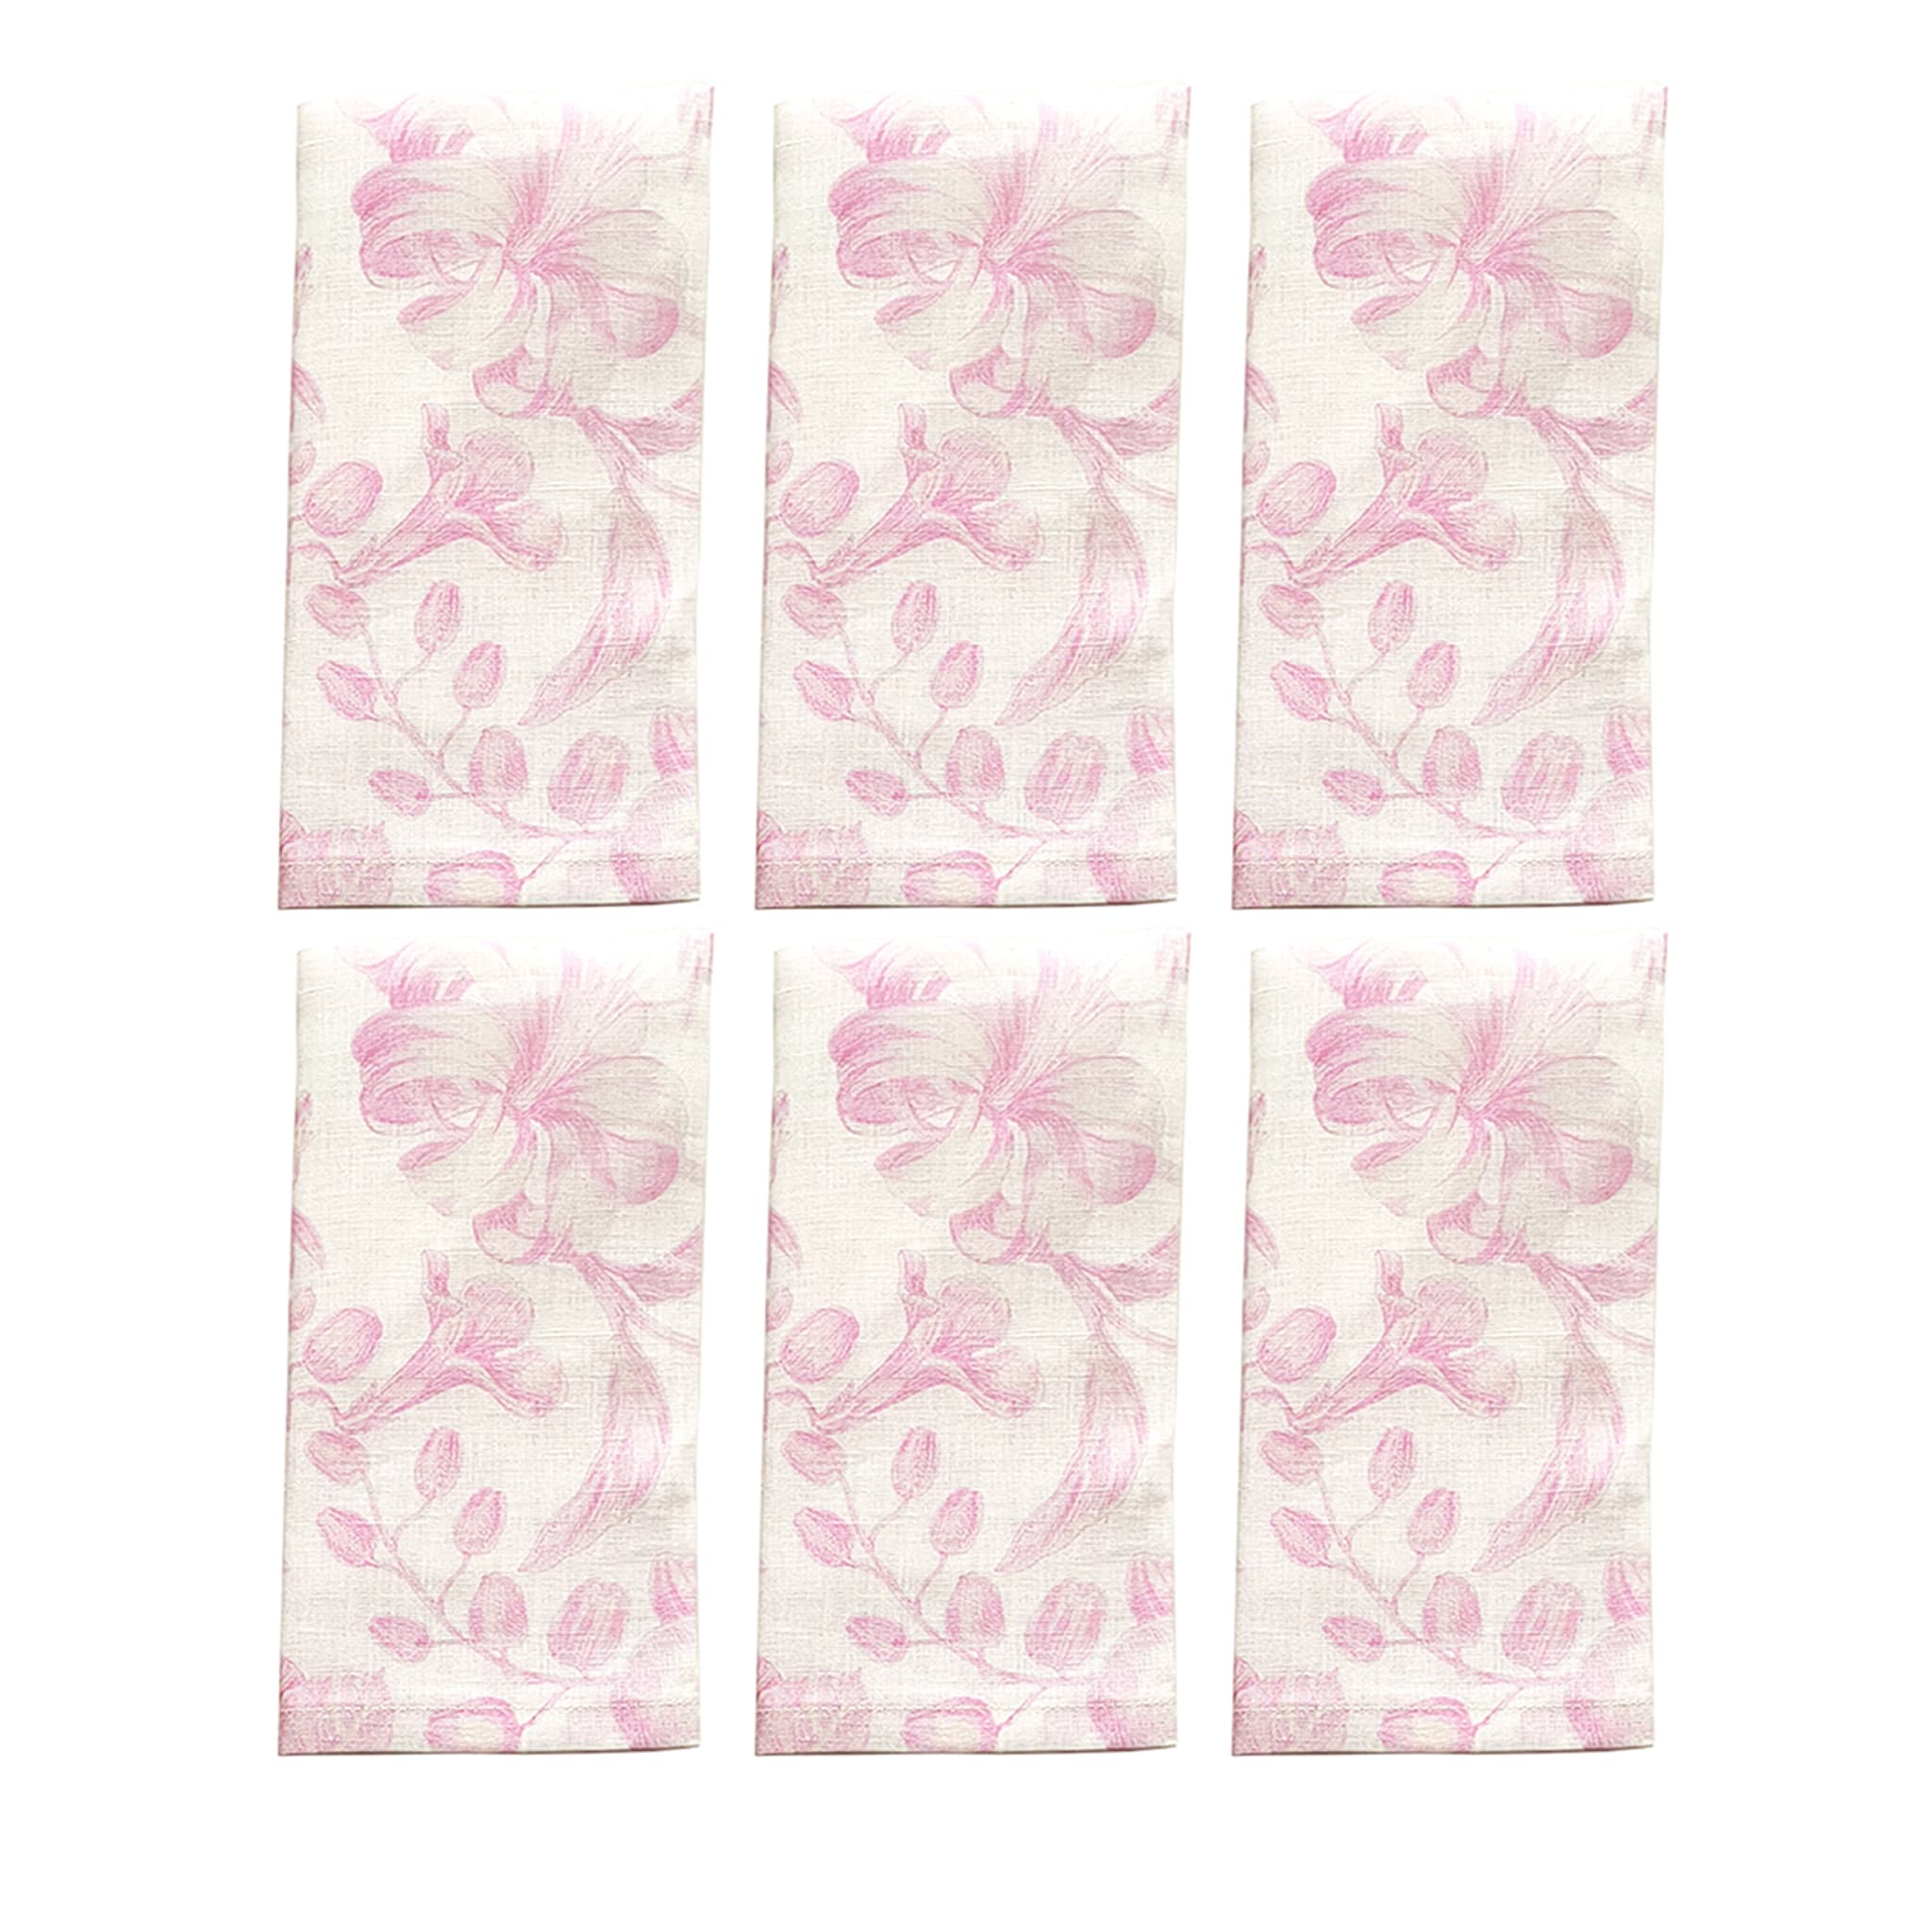 Marie Antoinette Set of 6 Pink & White Napkins - Main view